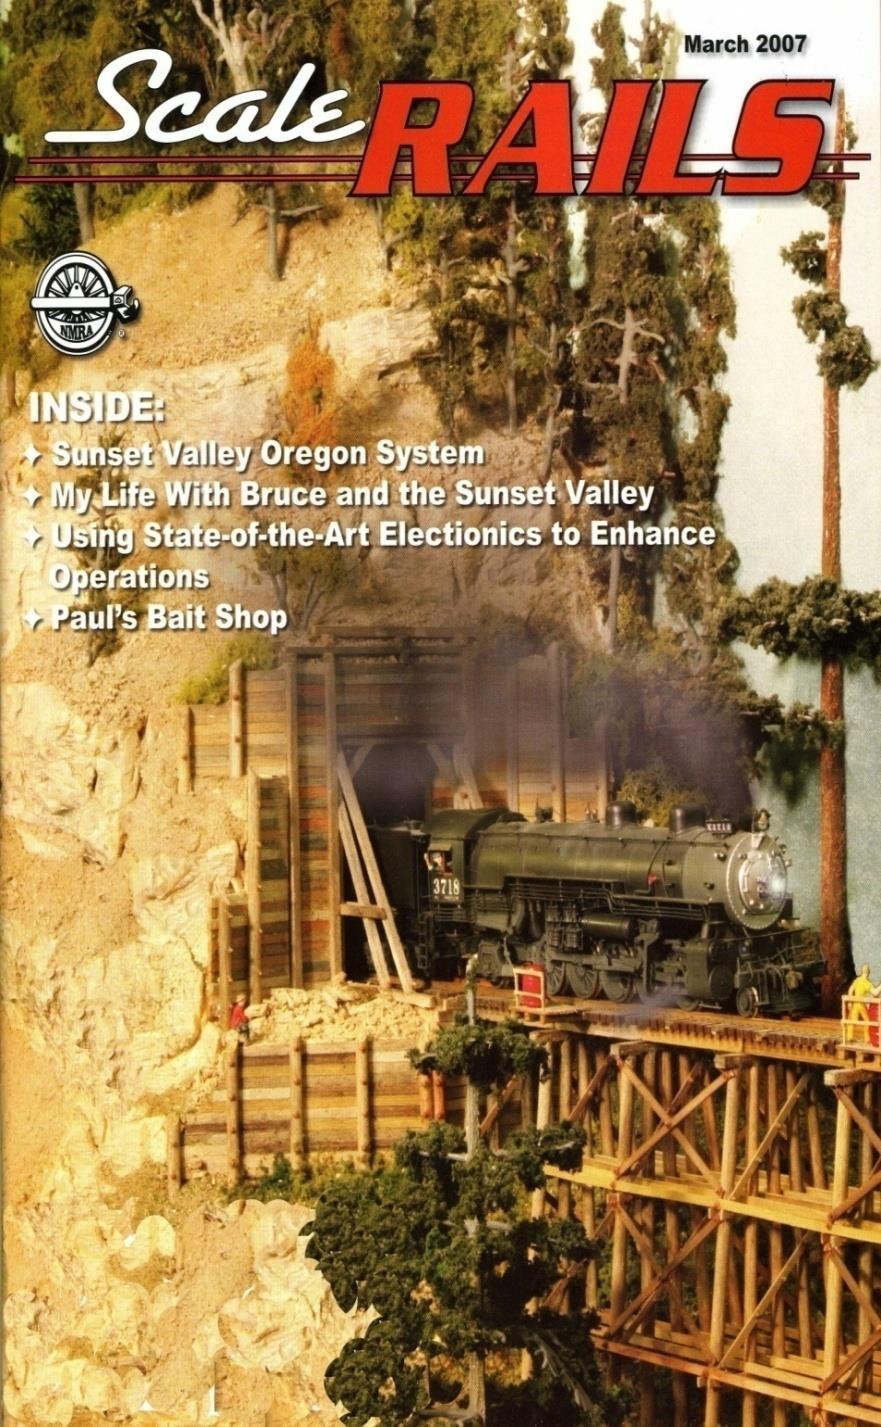 32 pages in the March 2007 issue of Scale Rails covering: State-of-the-Art Electronics to